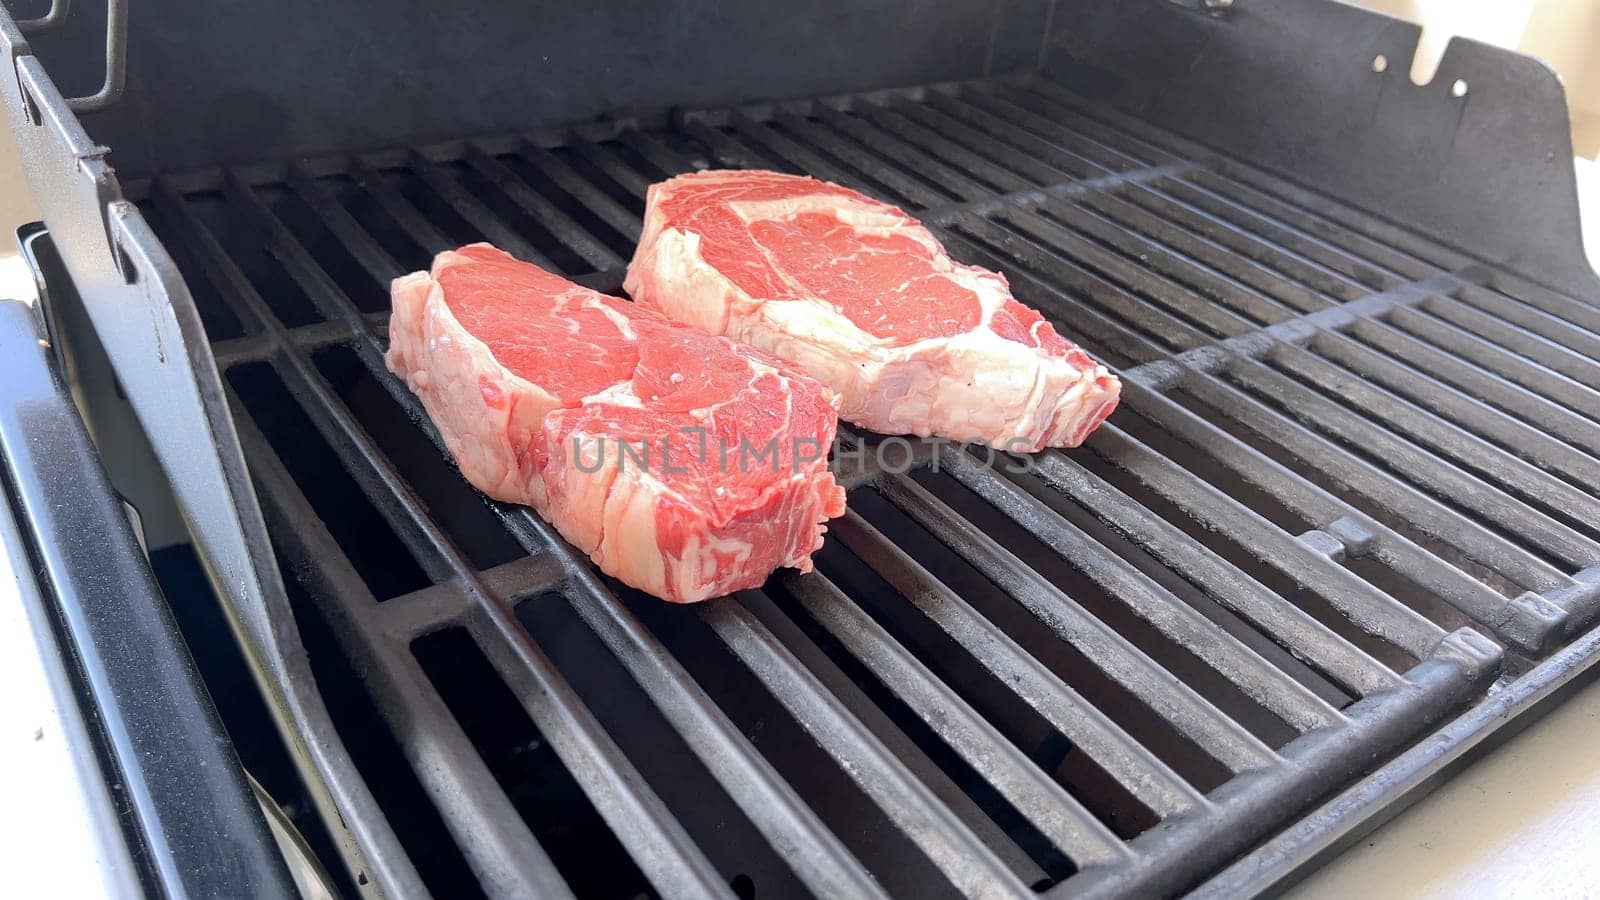 This image showcases the art of grilling, featuring three thick steaks cooking on a barbecue grill, with a row of foil-wrapped corn on the cob above, capturing a typical scene of a hearty outdoor meal preparation.